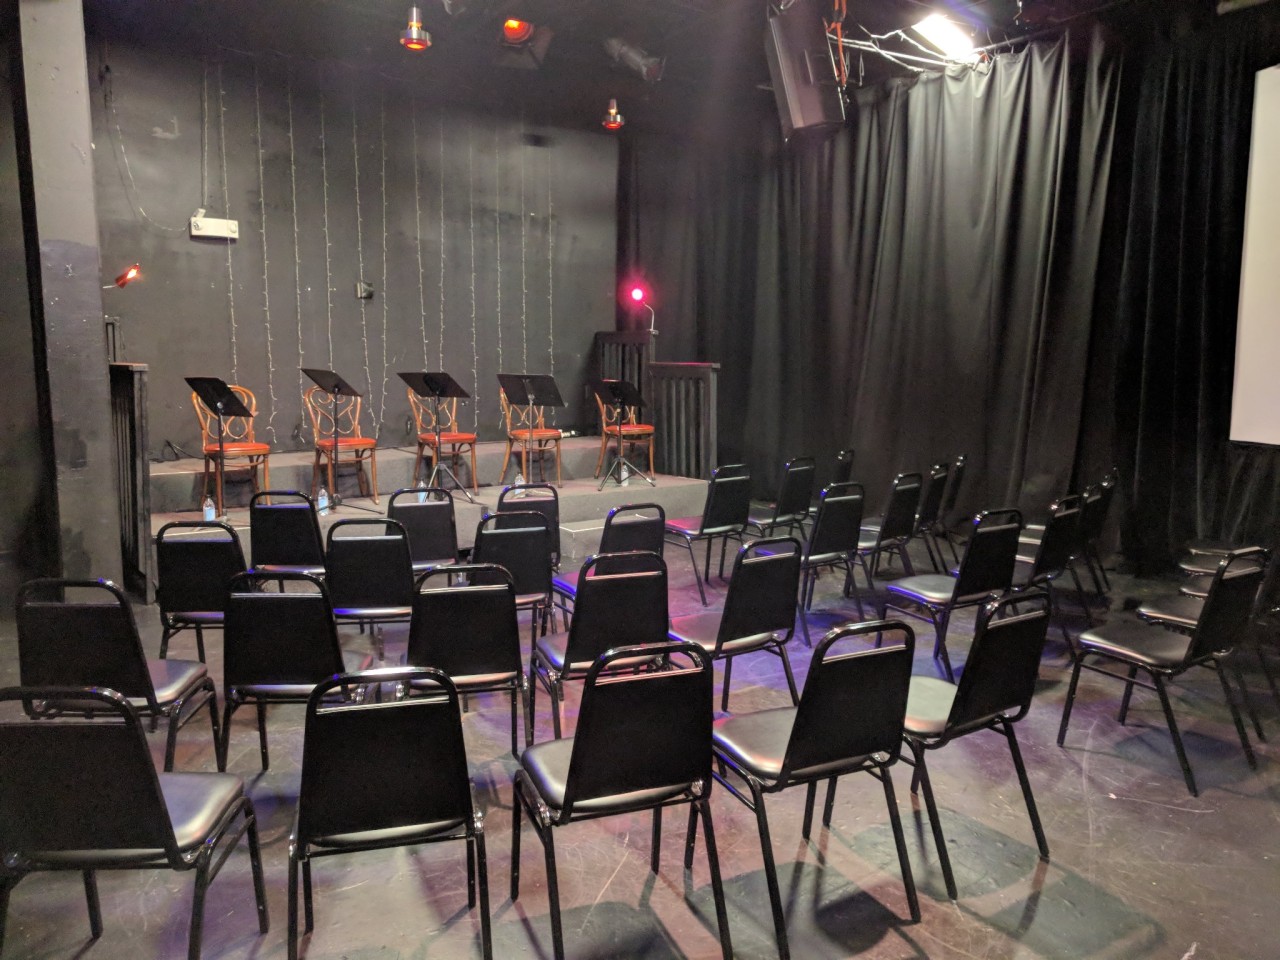 A before photo of seating arrangements for a reading of THE PERFECT AMERCAN